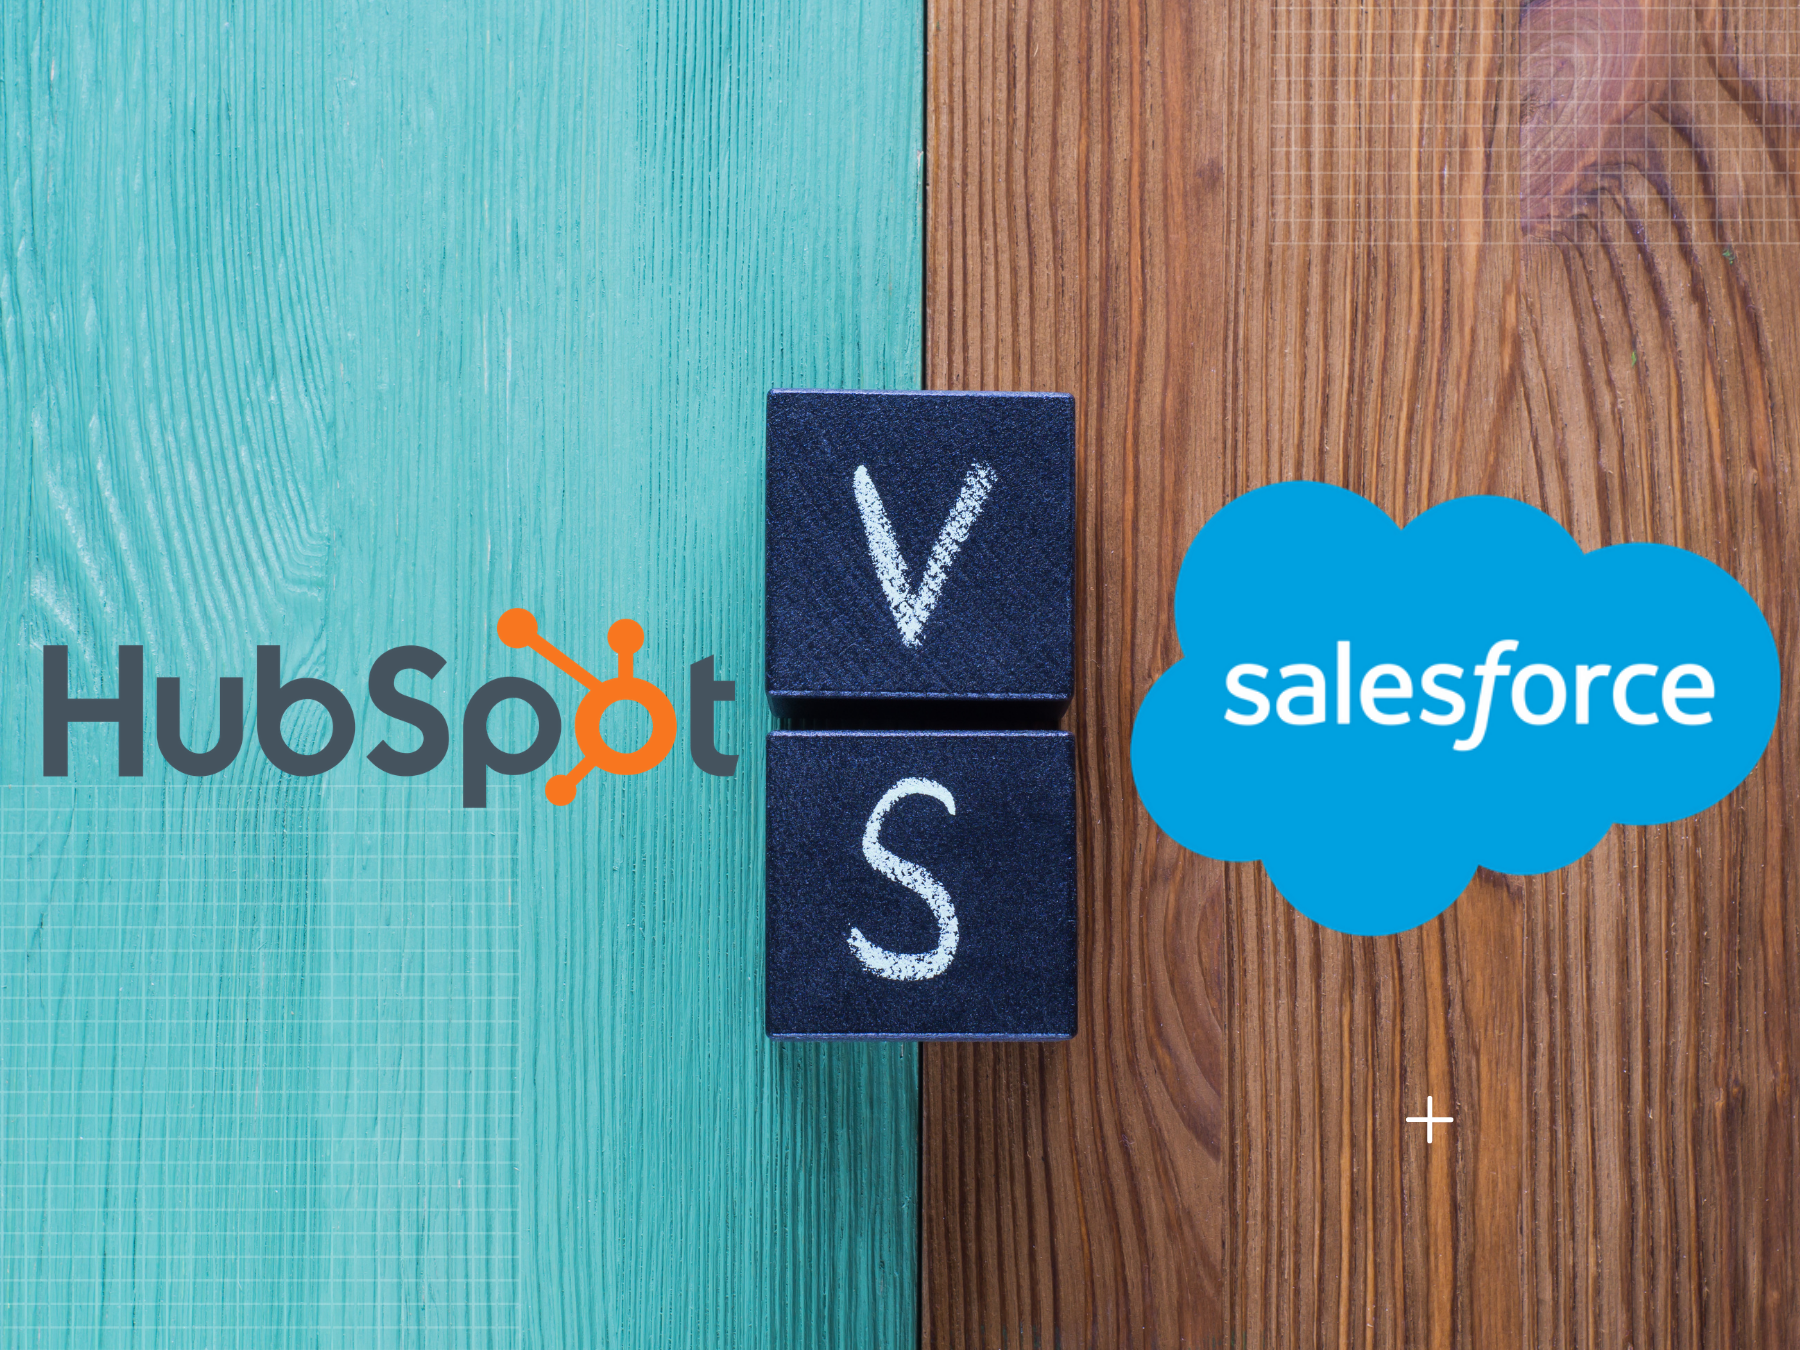 Compare HubSpot and Salesforce: which one is right for my business?